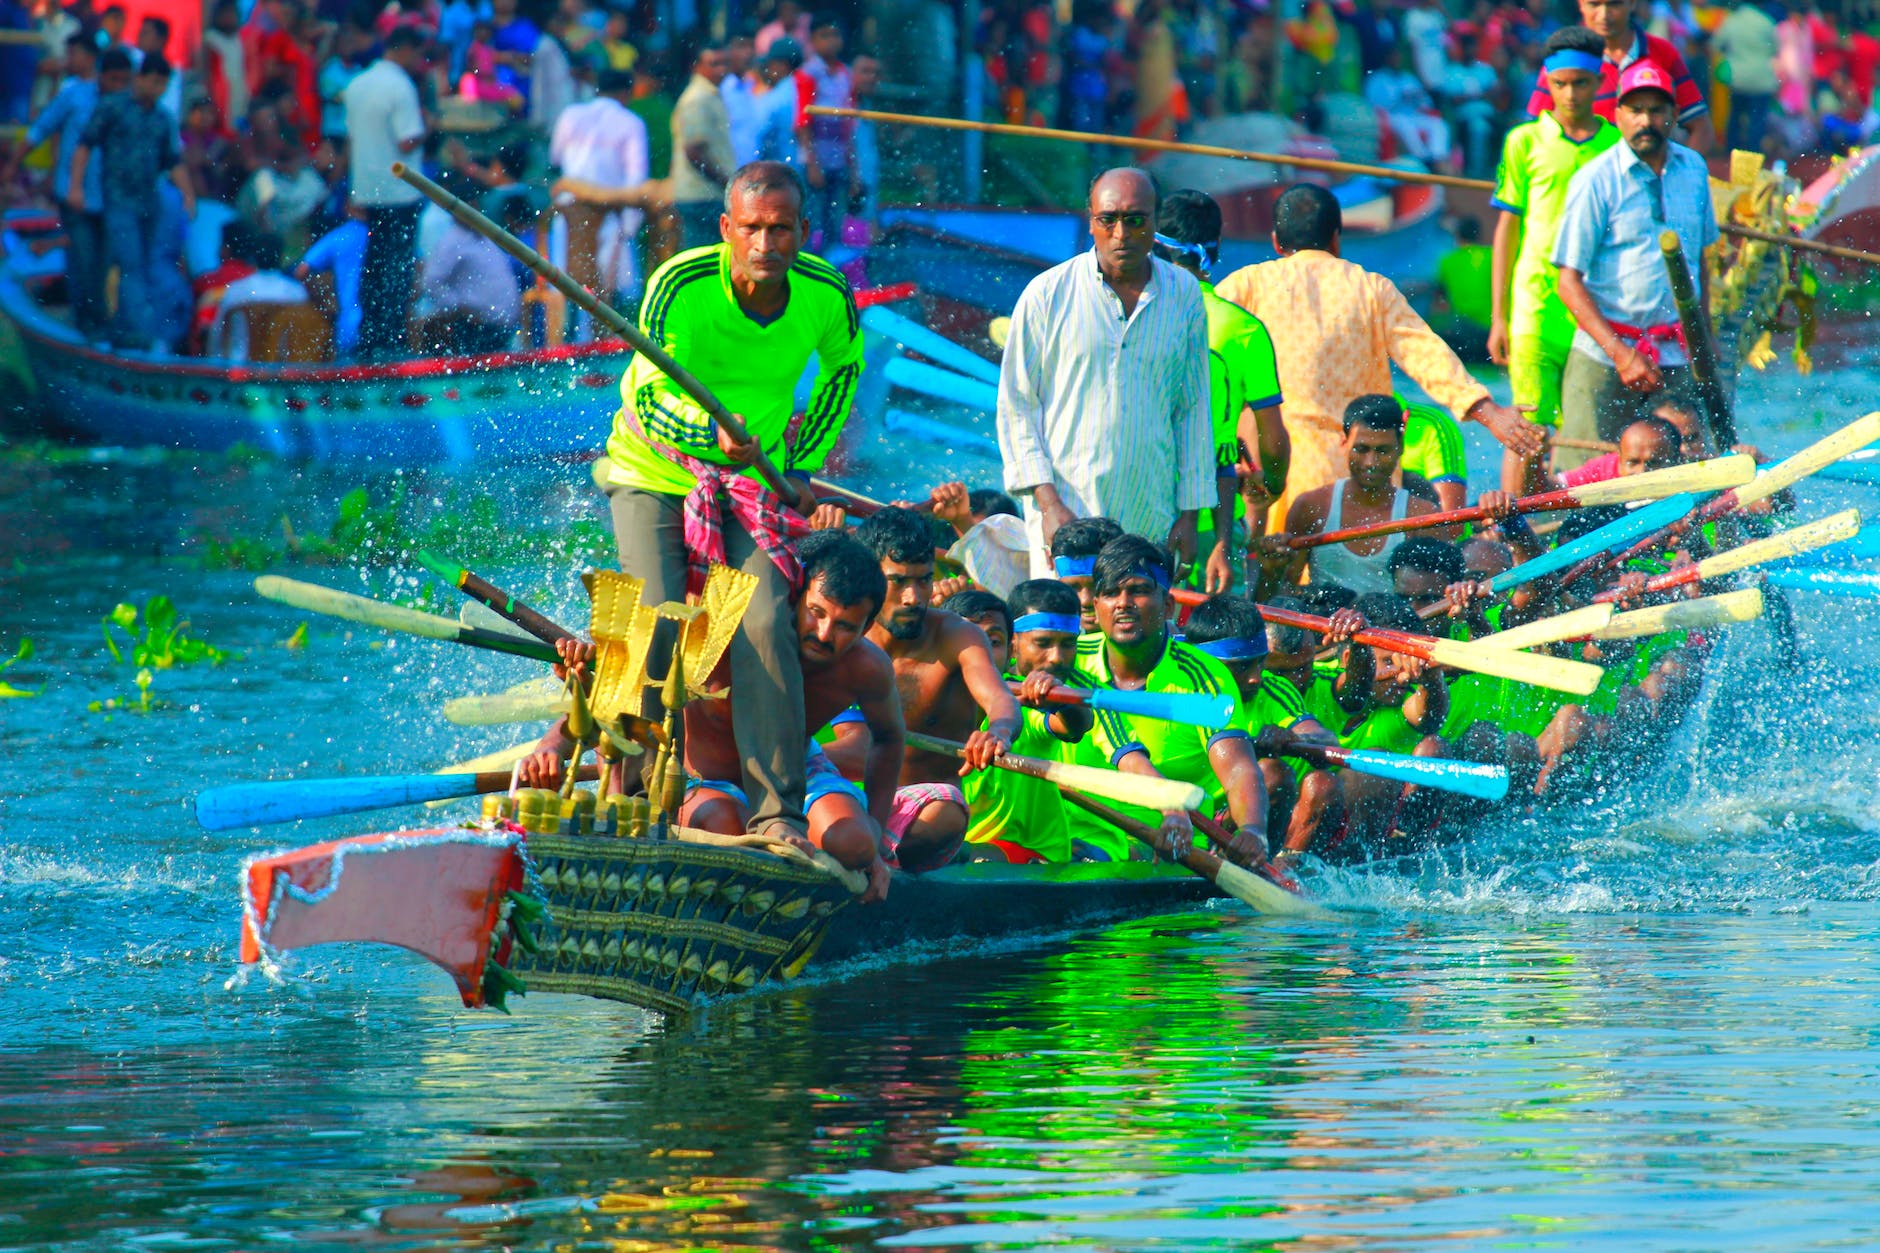 athletes riding on a dragon boat